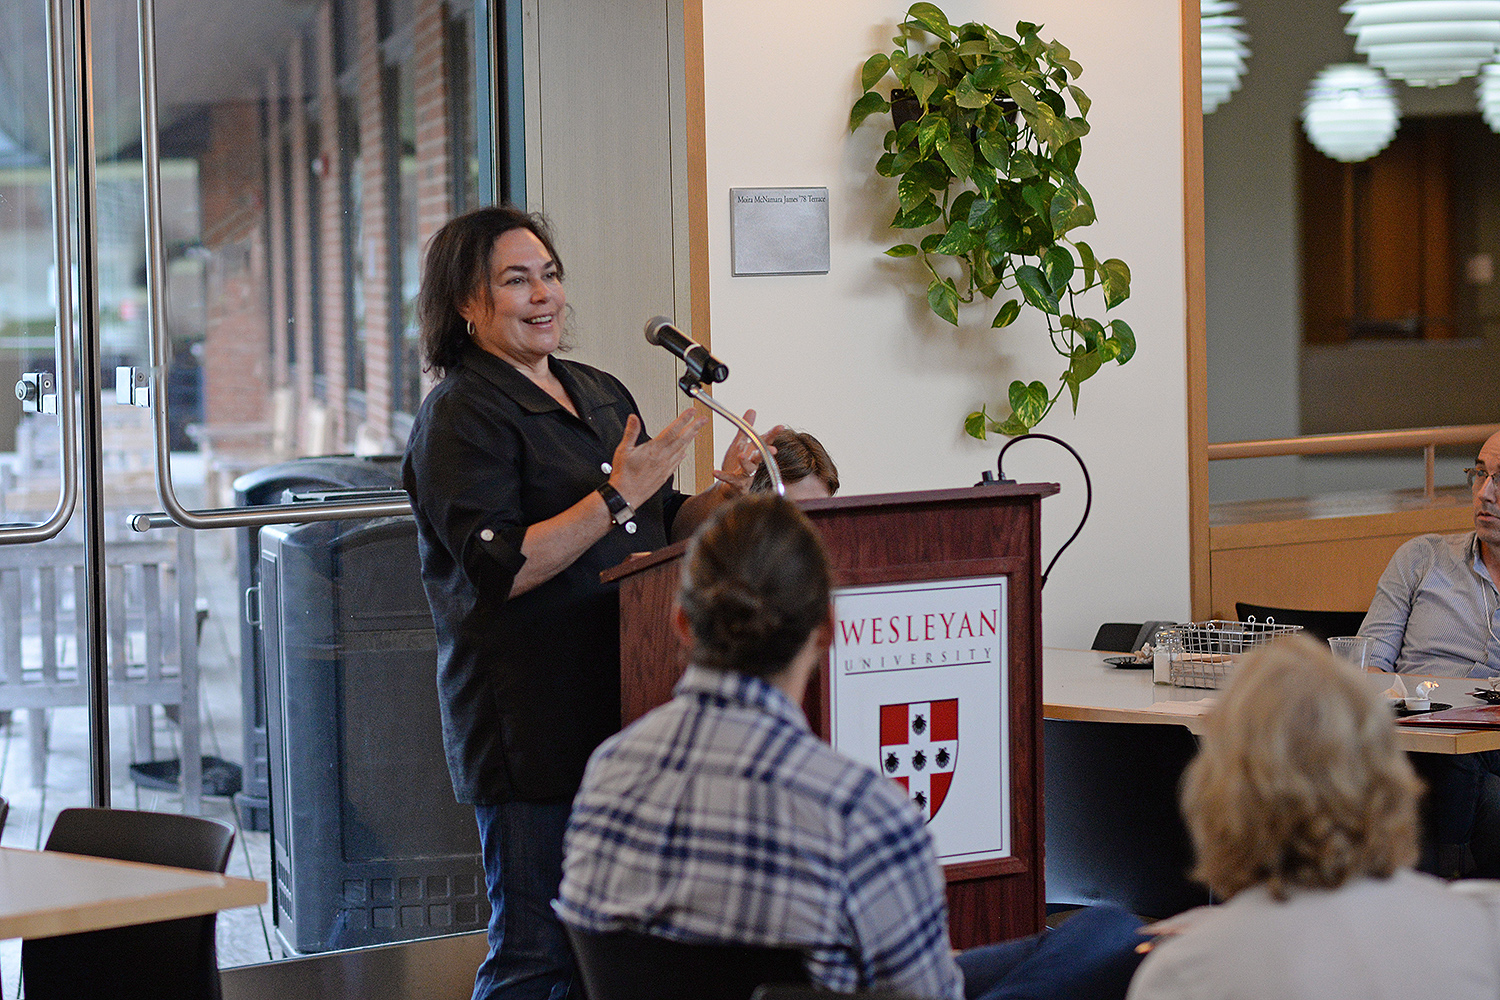 Amy Bloom, the Distinguished University Writer-in-Residence at Wesleyan, made remarks at the Writing Conference. Bloom is the author of three novels, three collections of short stories, a children's book, and an essay collection. She has been a nominee for both the National Book Award and the National Book Critics Circle Award. 